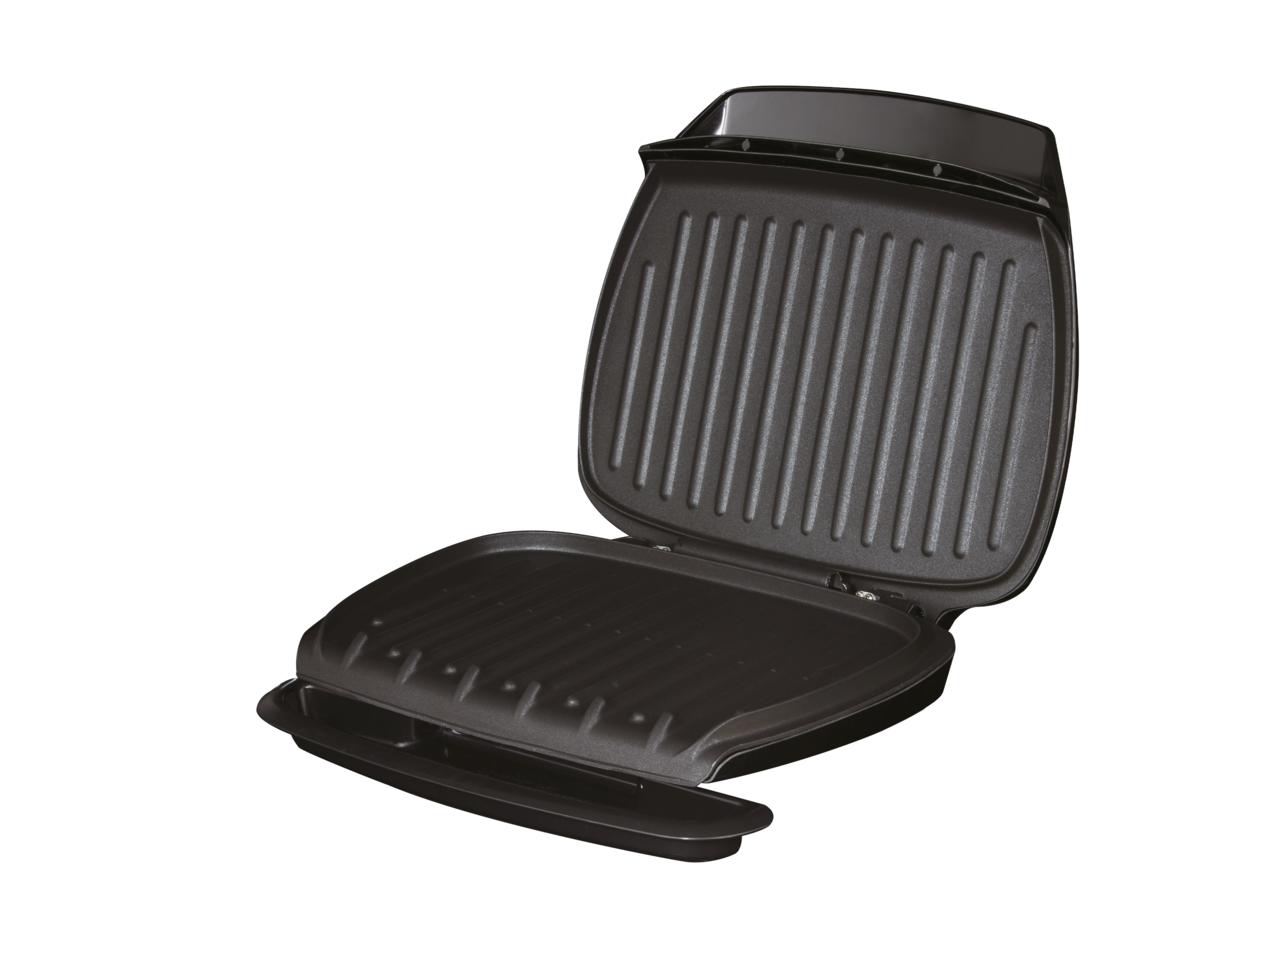 GEORGE FOREMAN 5 Portion Family Health Grill